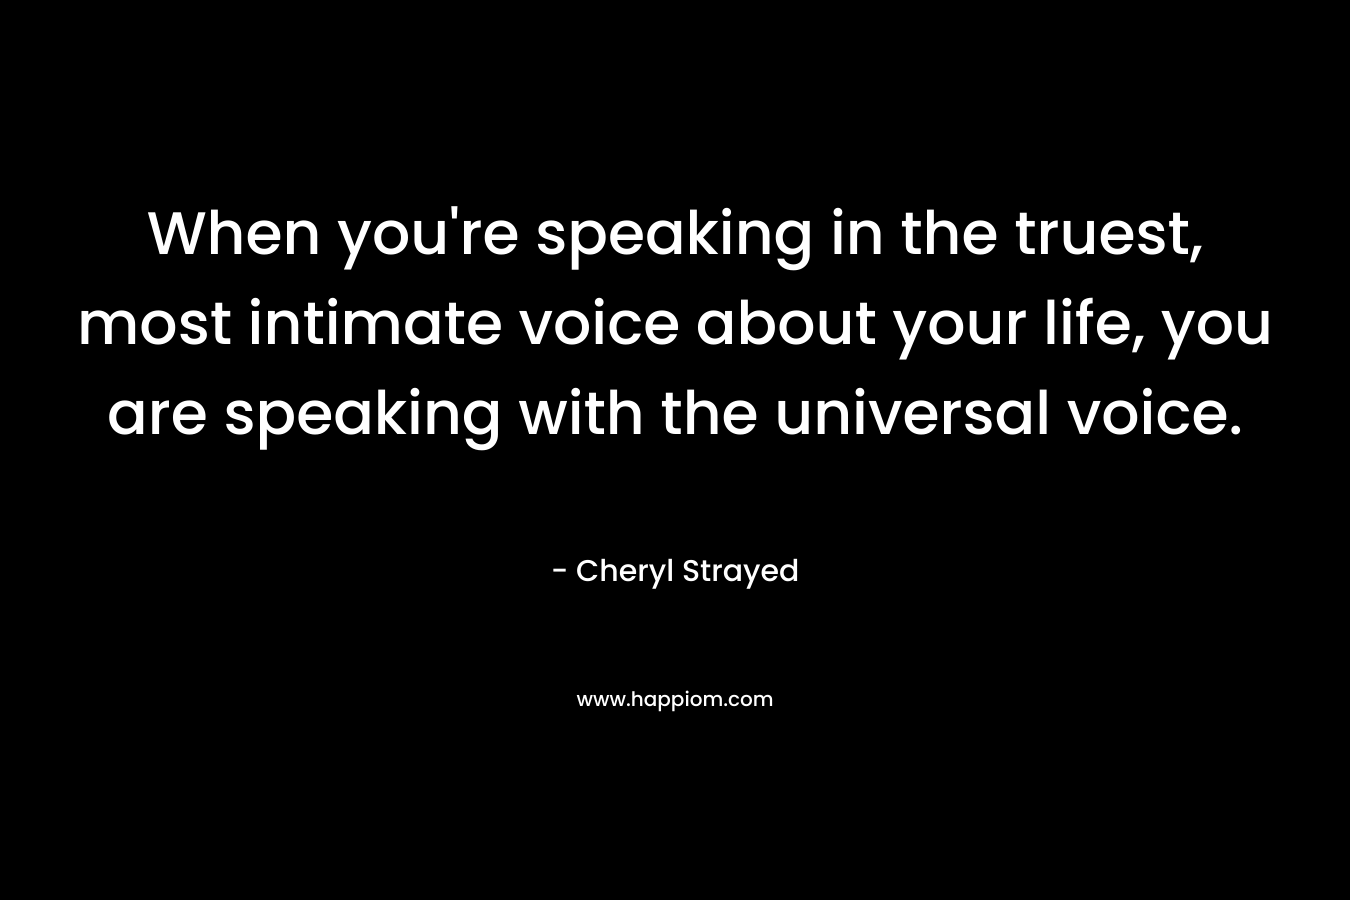 When you're speaking in the truest, most intimate voice about your life, you are speaking with the universal voice.